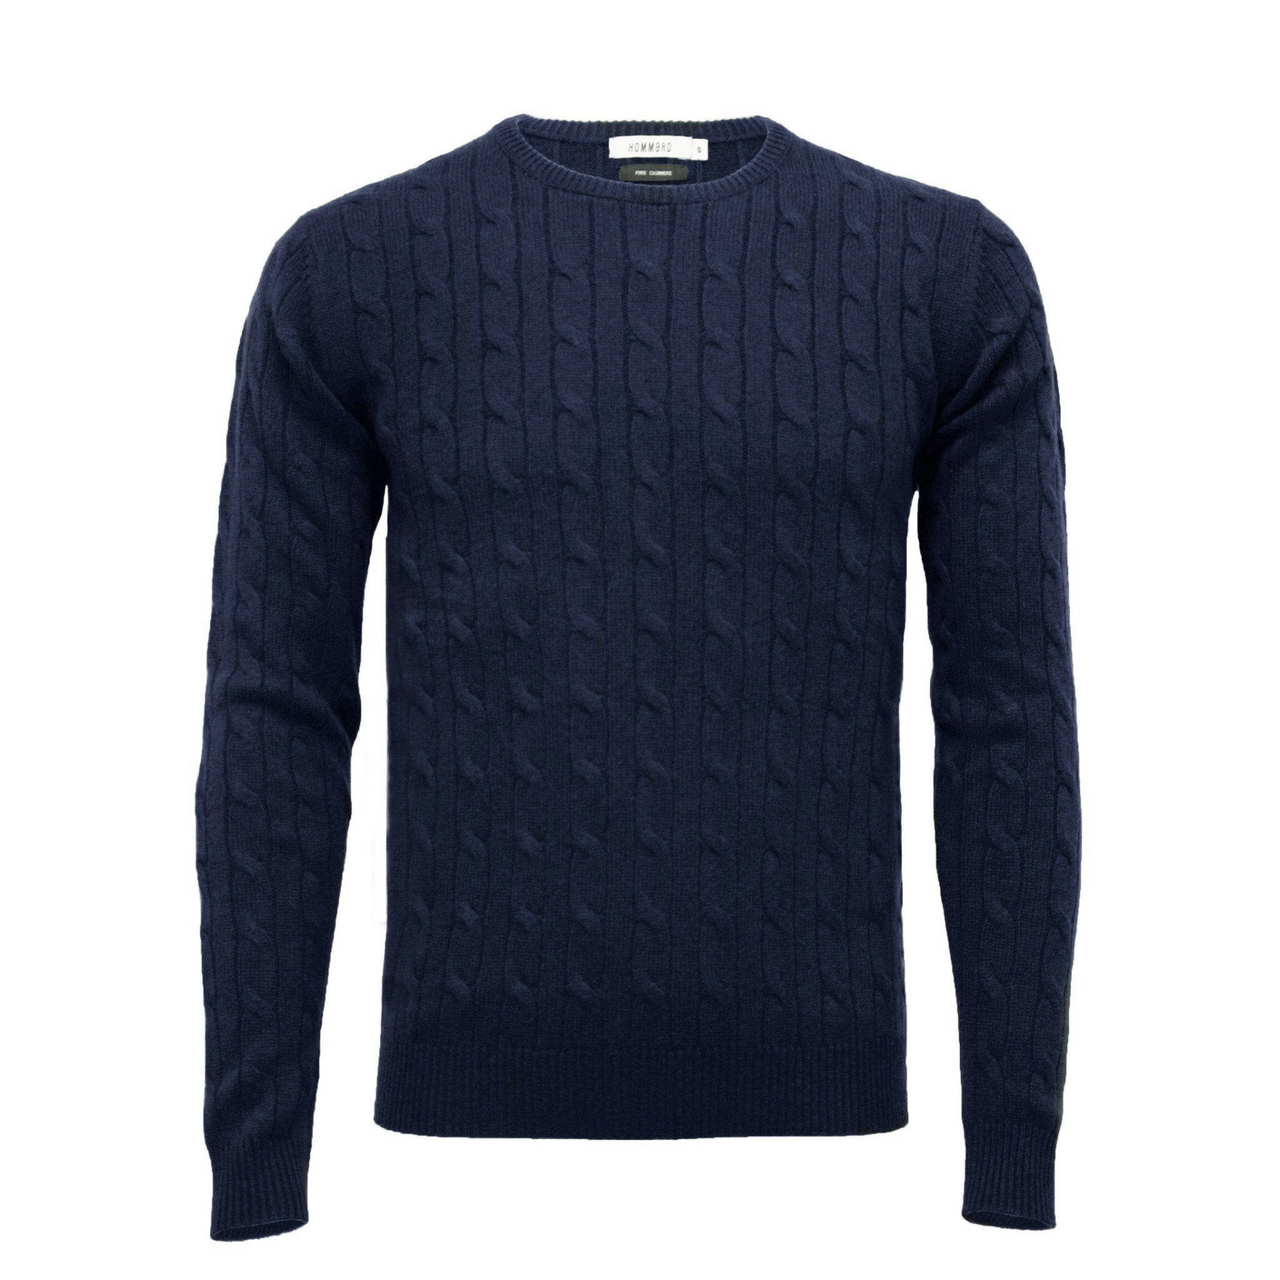 Navy Cashmere Crew Neck Cable Sweater